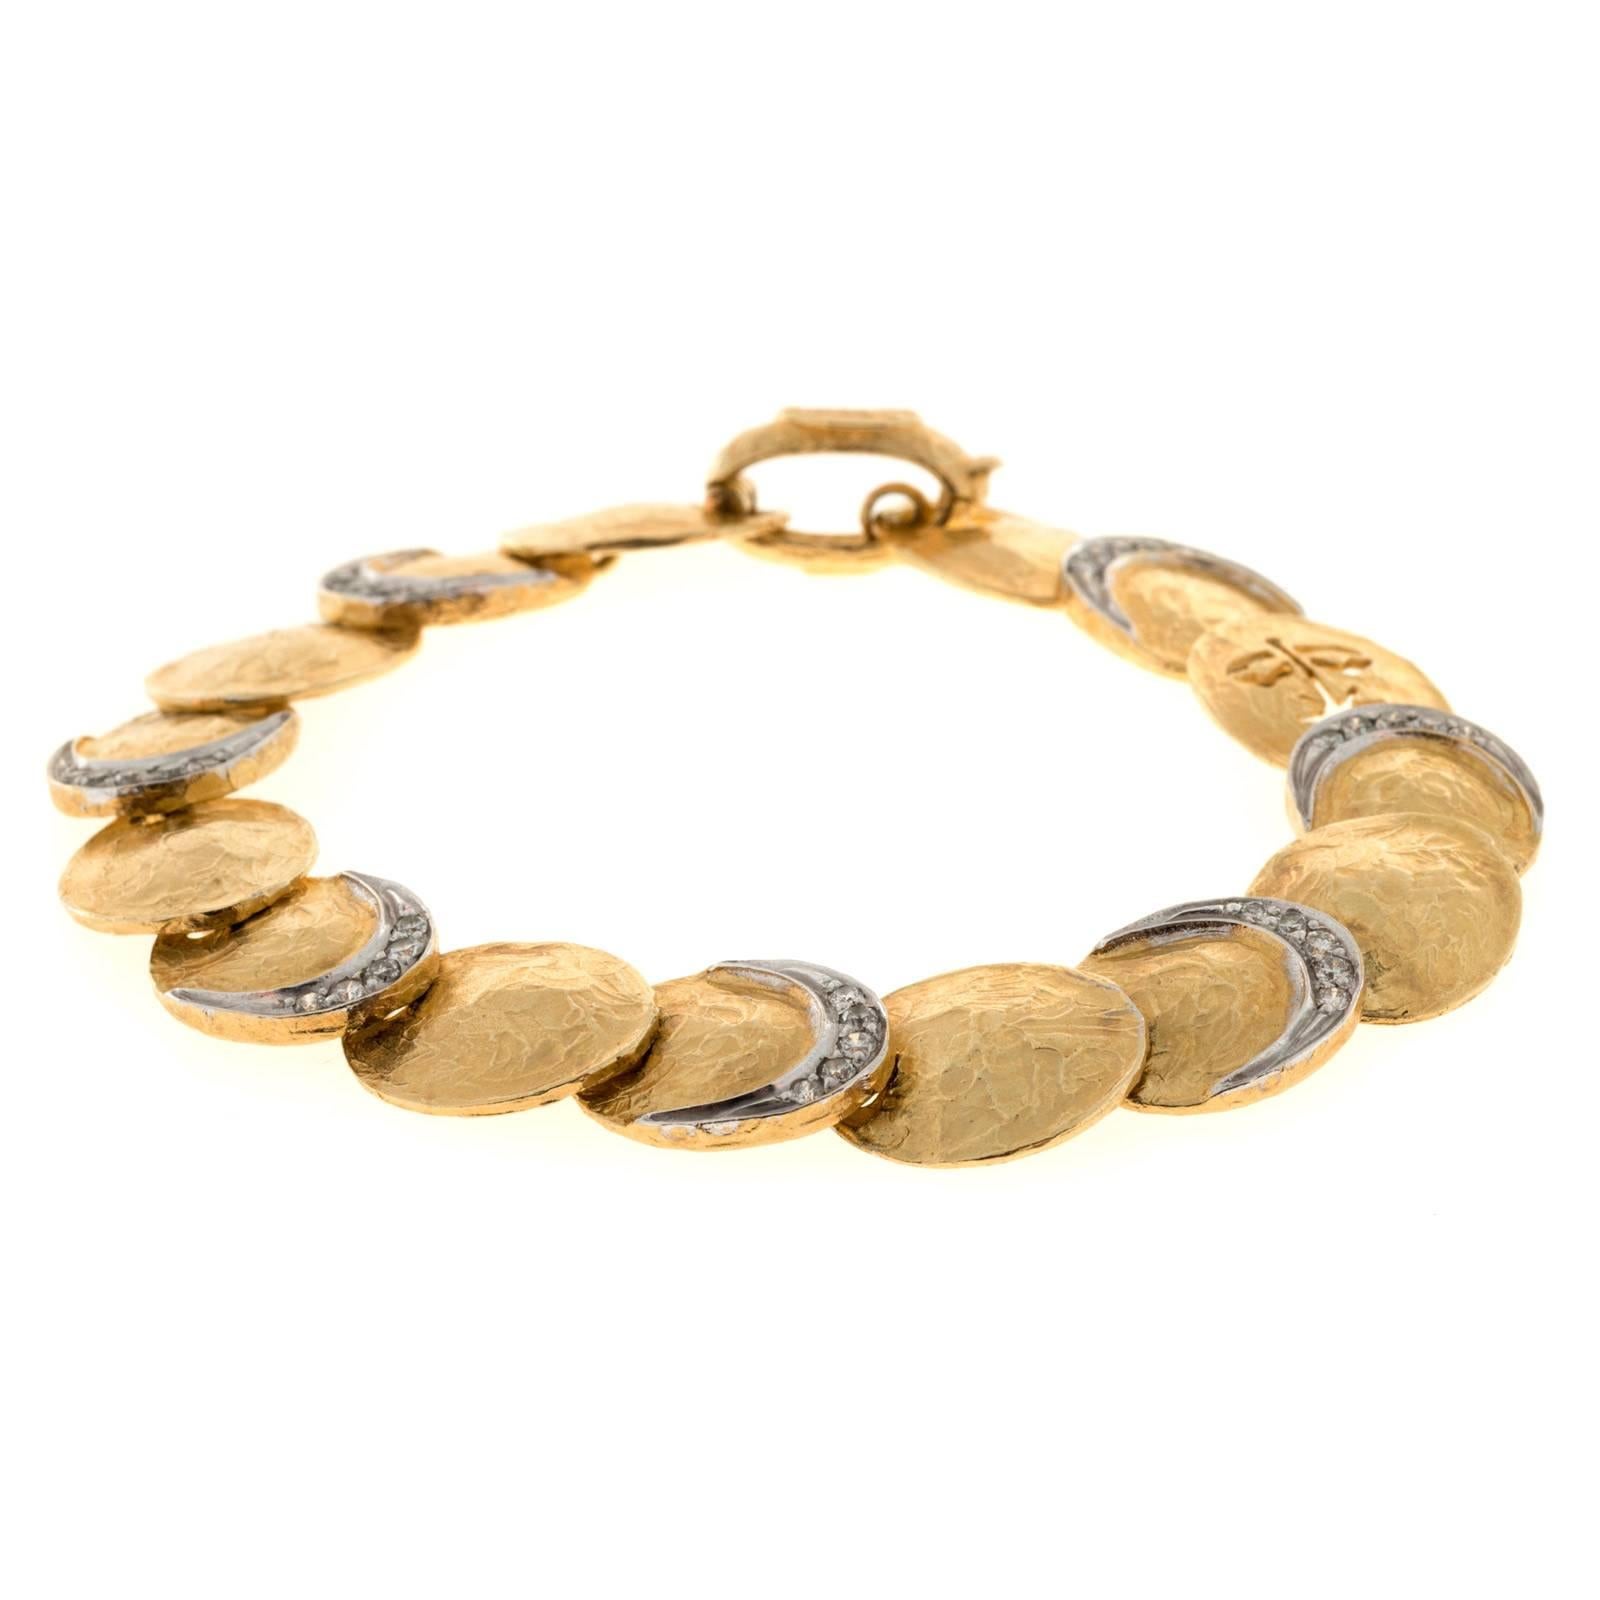 Textured link Torrini Italian 14k gold designer bracelet with diamond accents.

35 round diamonds approx. total weight .40cts, H, SI
14k Yellow Gold
Tested: 14k 
Stamped: Torrini Made in Italy
22.7 grams
7 inches long
Just under 1/2 inch